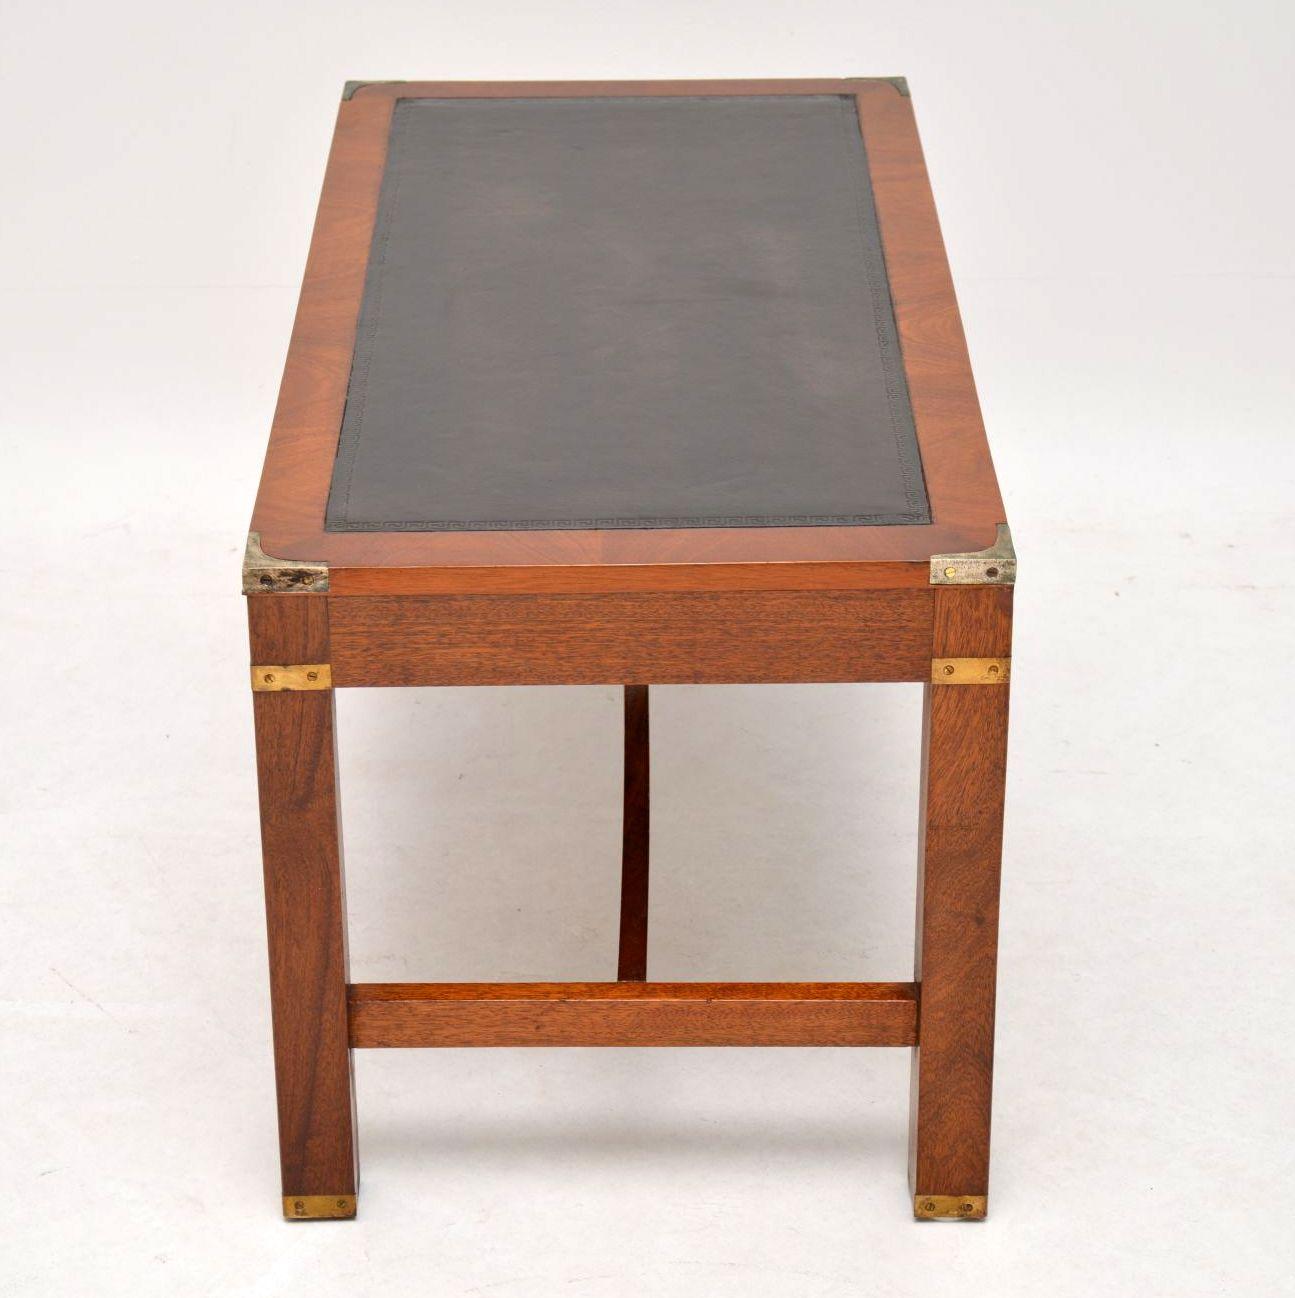 British Antique Mahogany Leather Top Coffee Table